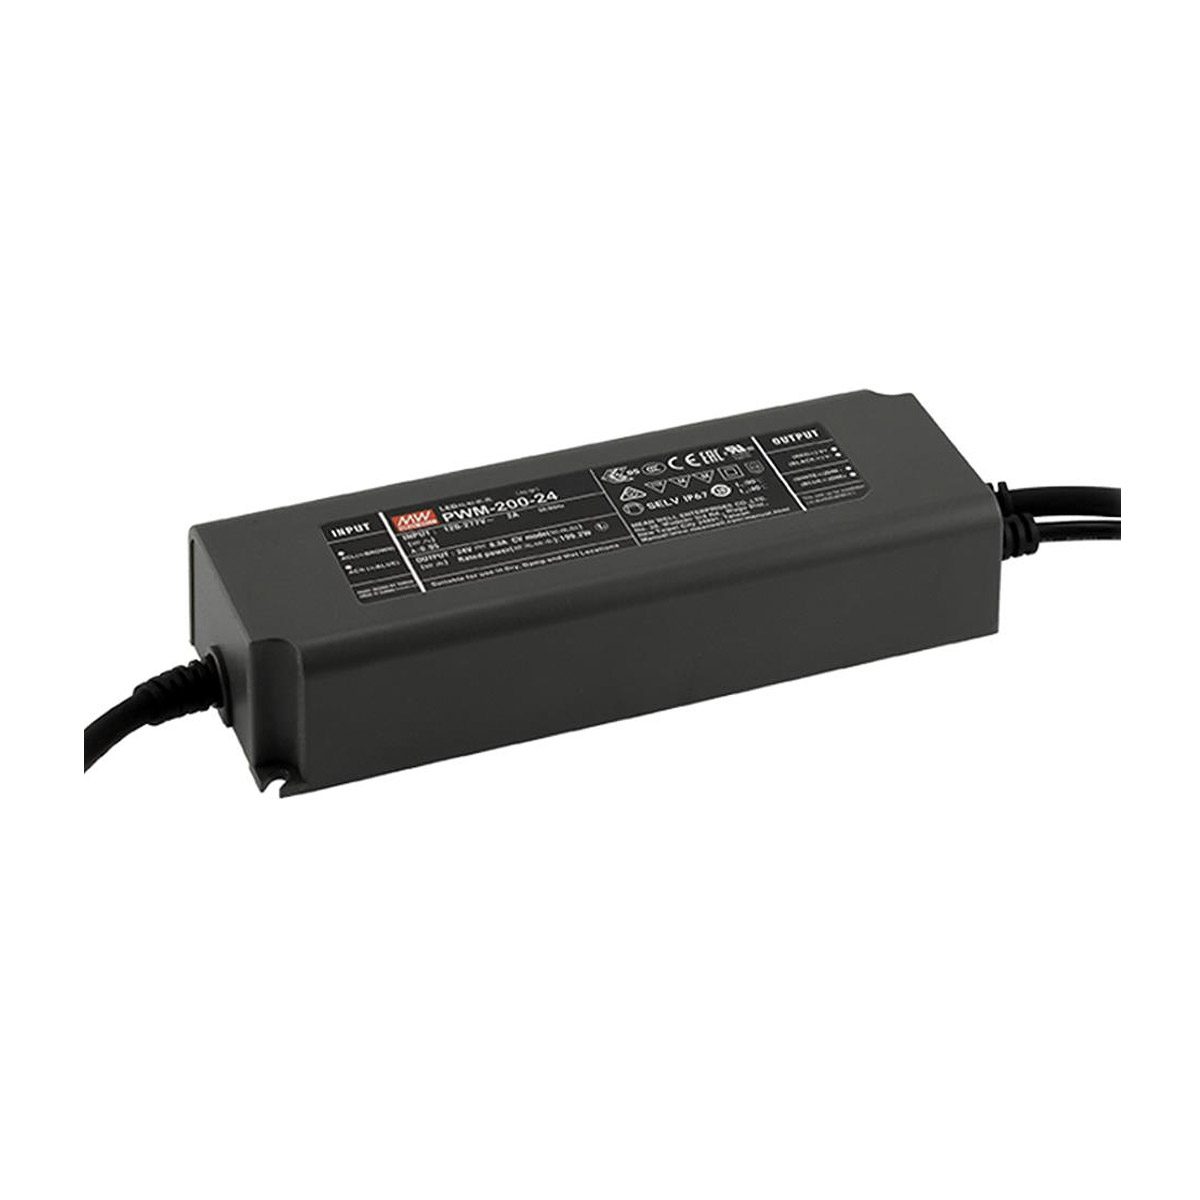 MEAN WELL Power supply 24V DC  200W max. - built-in driver - IP67  1 output